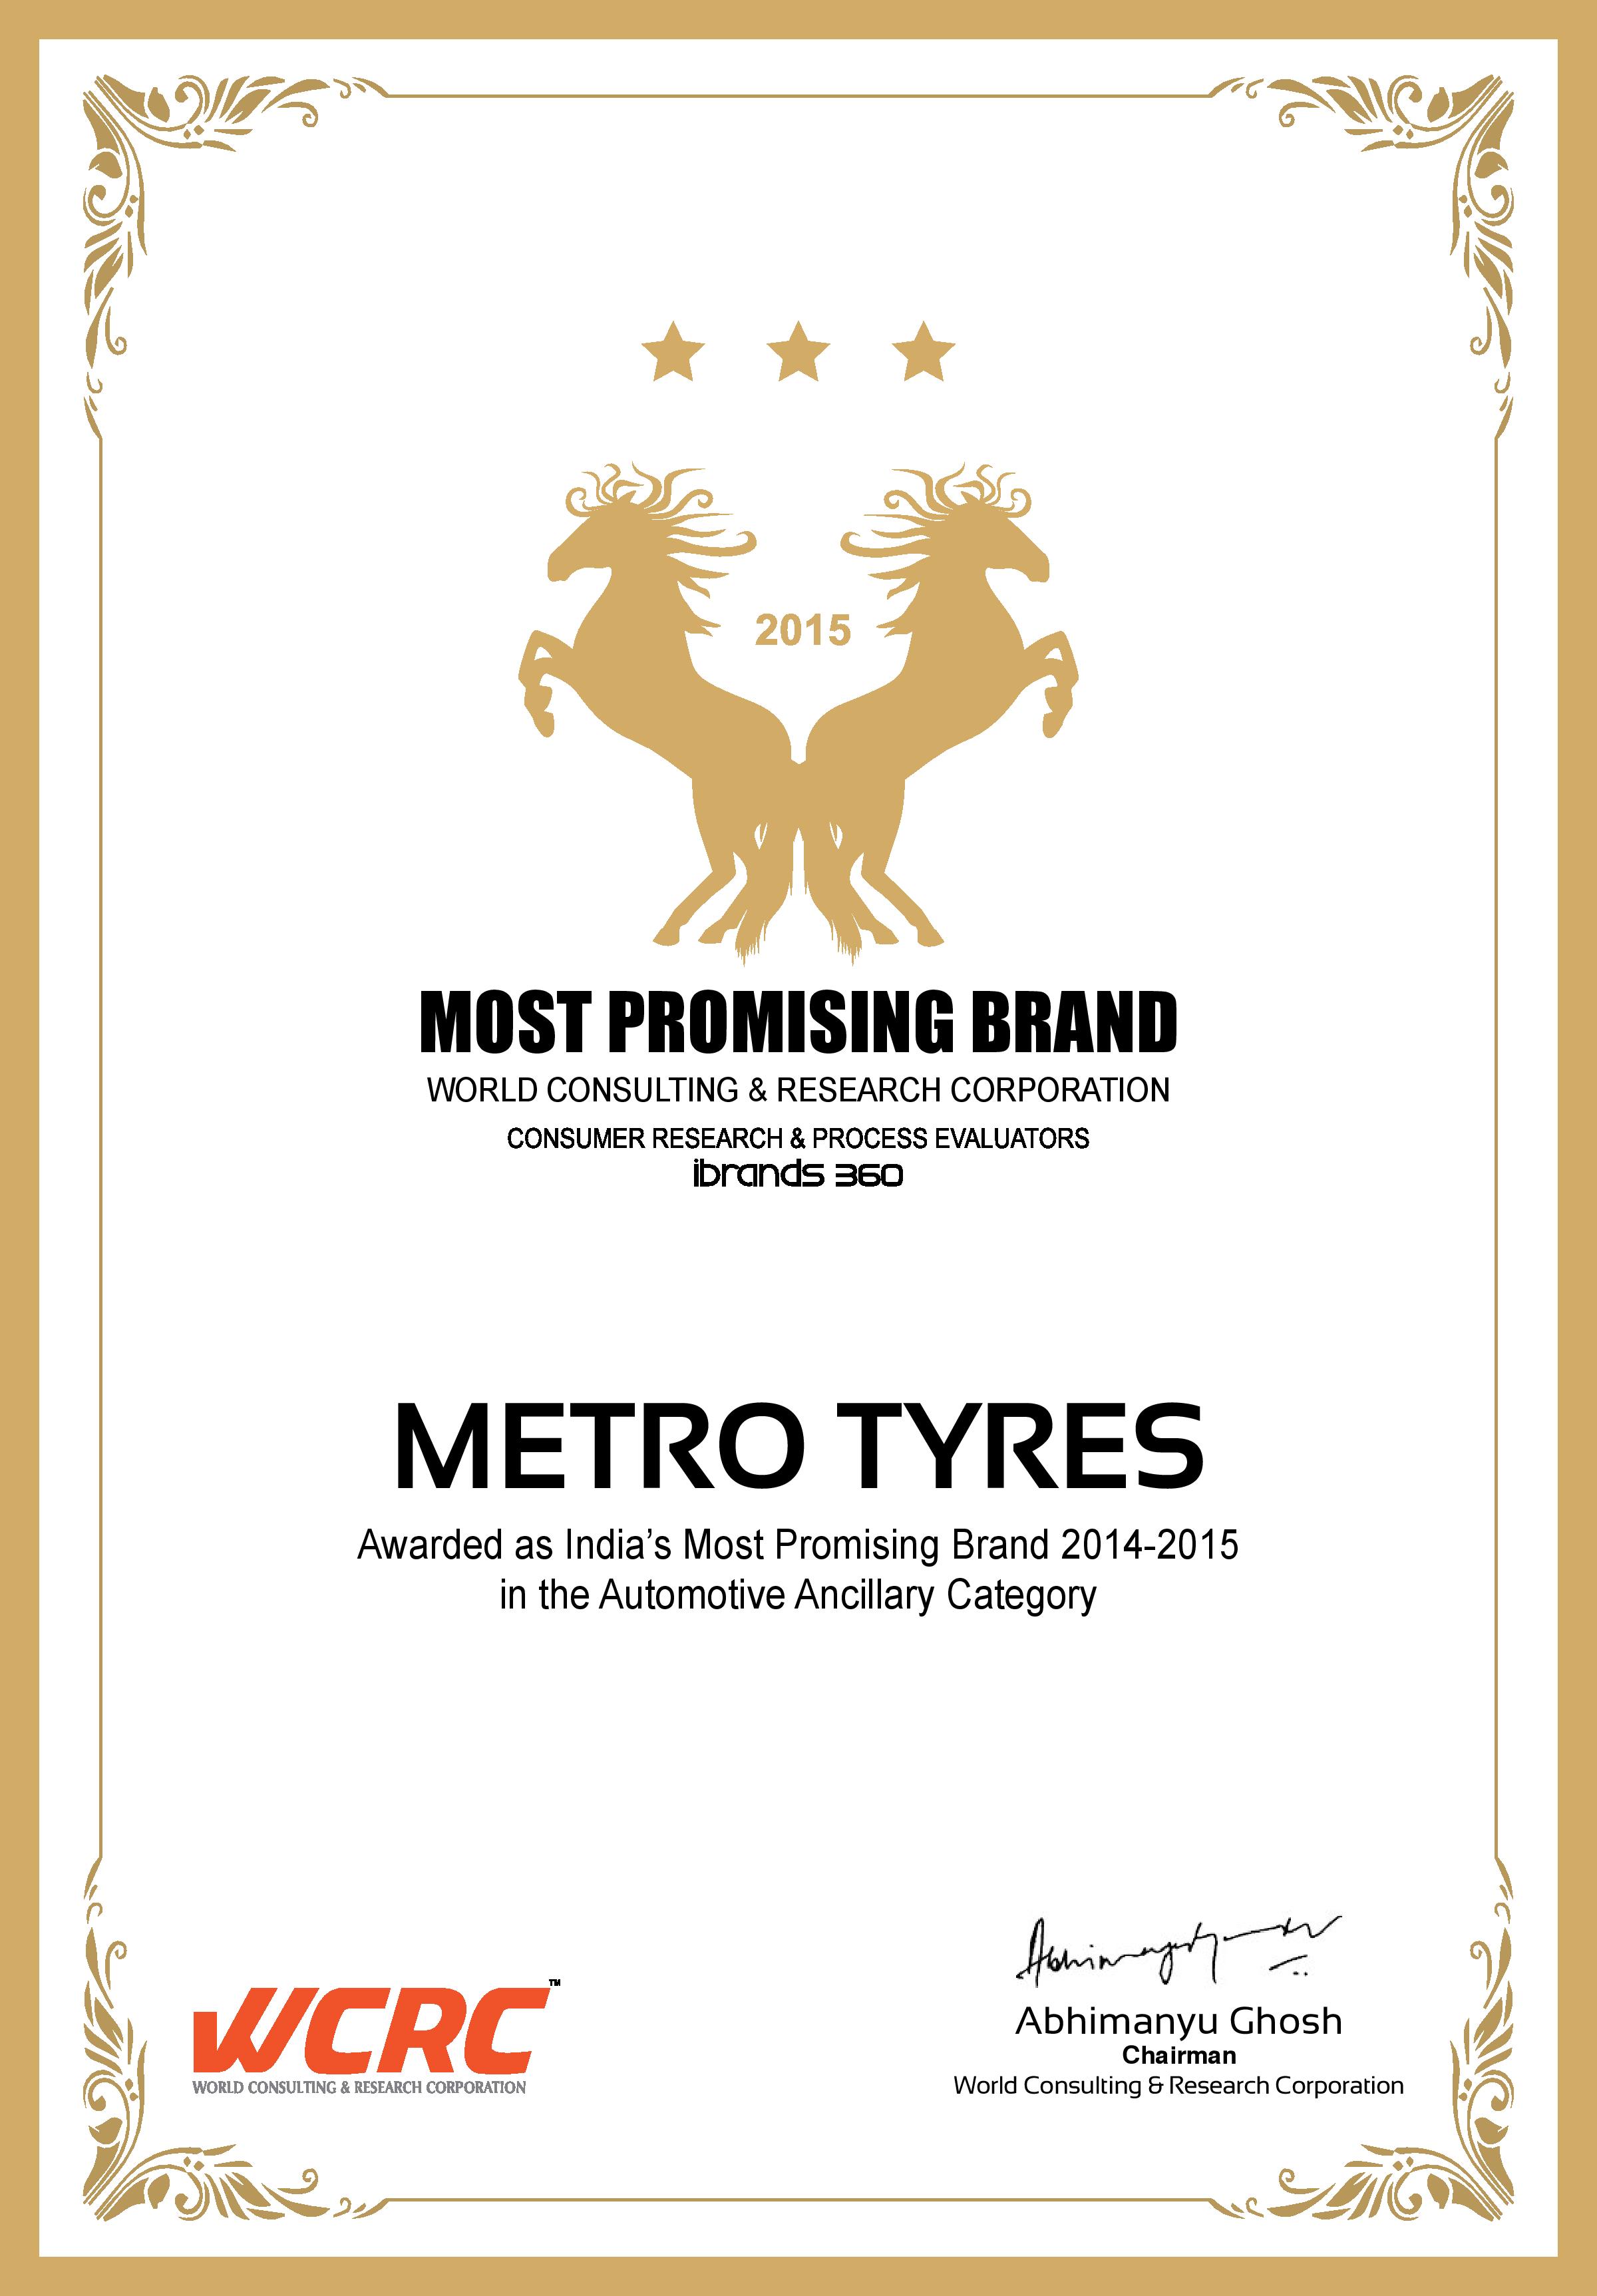 Metro Tyres Awarded as India's Most Promising Brand of 2014-15 by WCRC